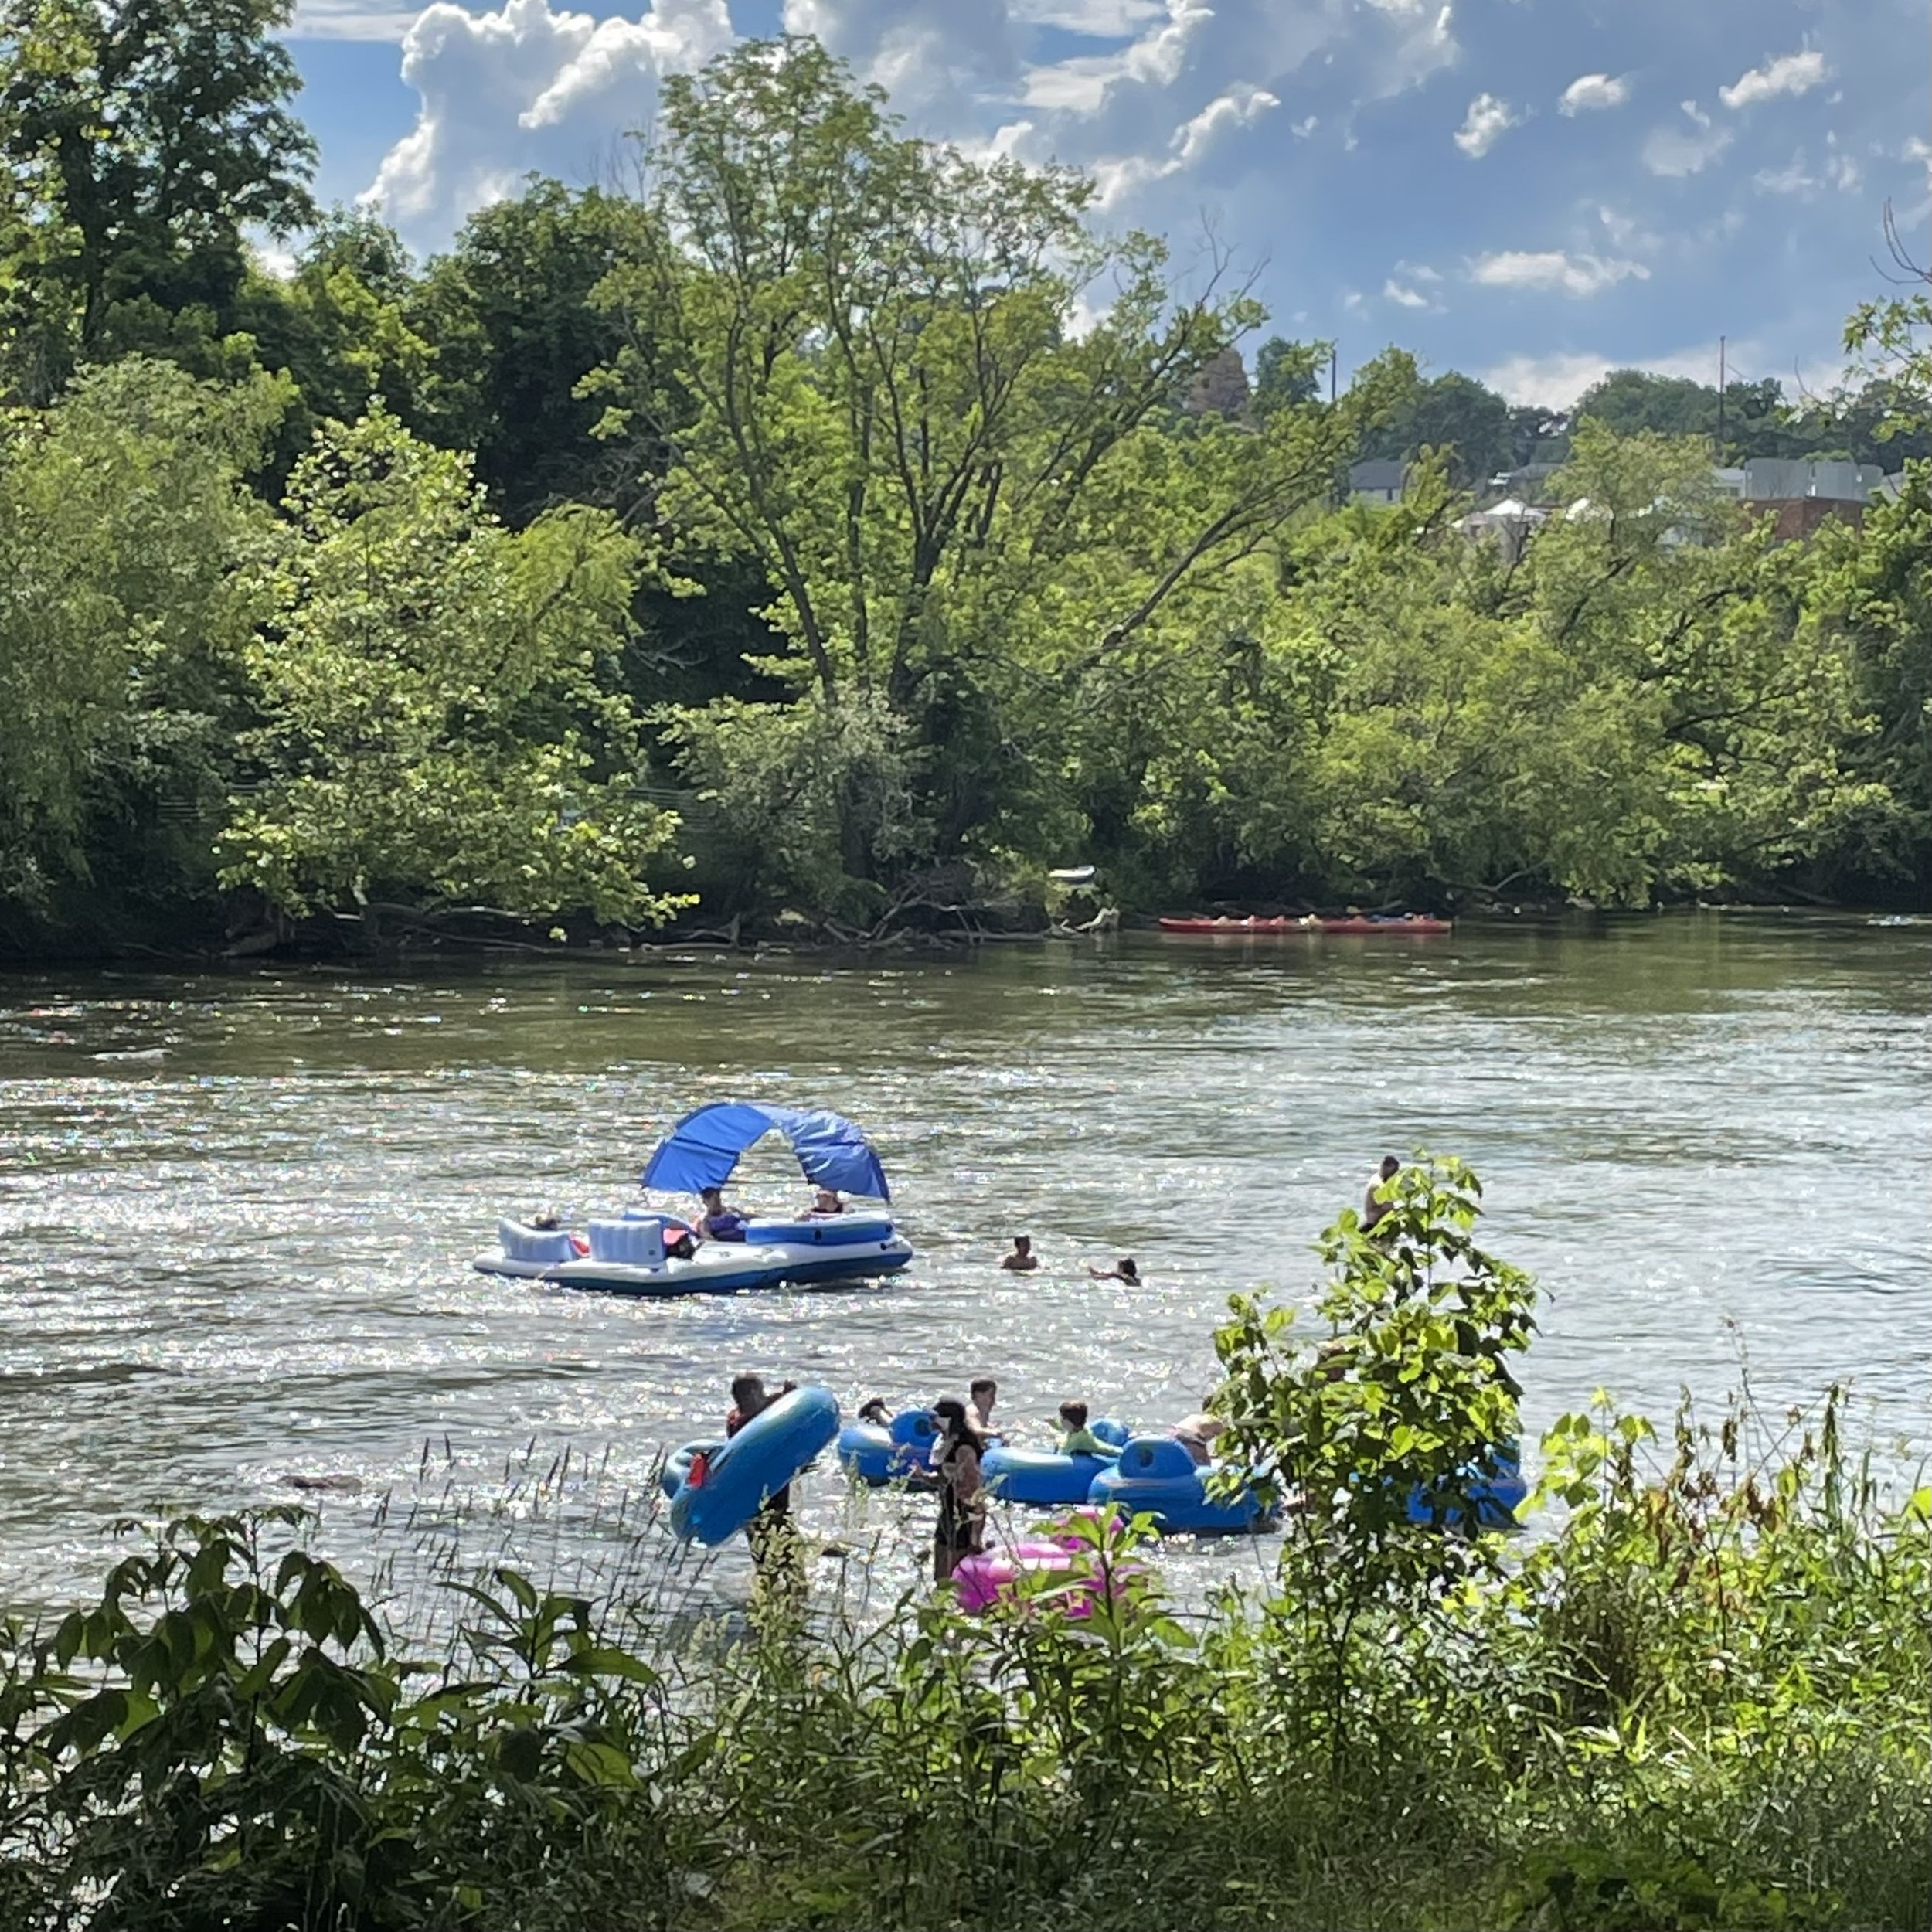 people tubing on the french broad river in asheville nc.jpg